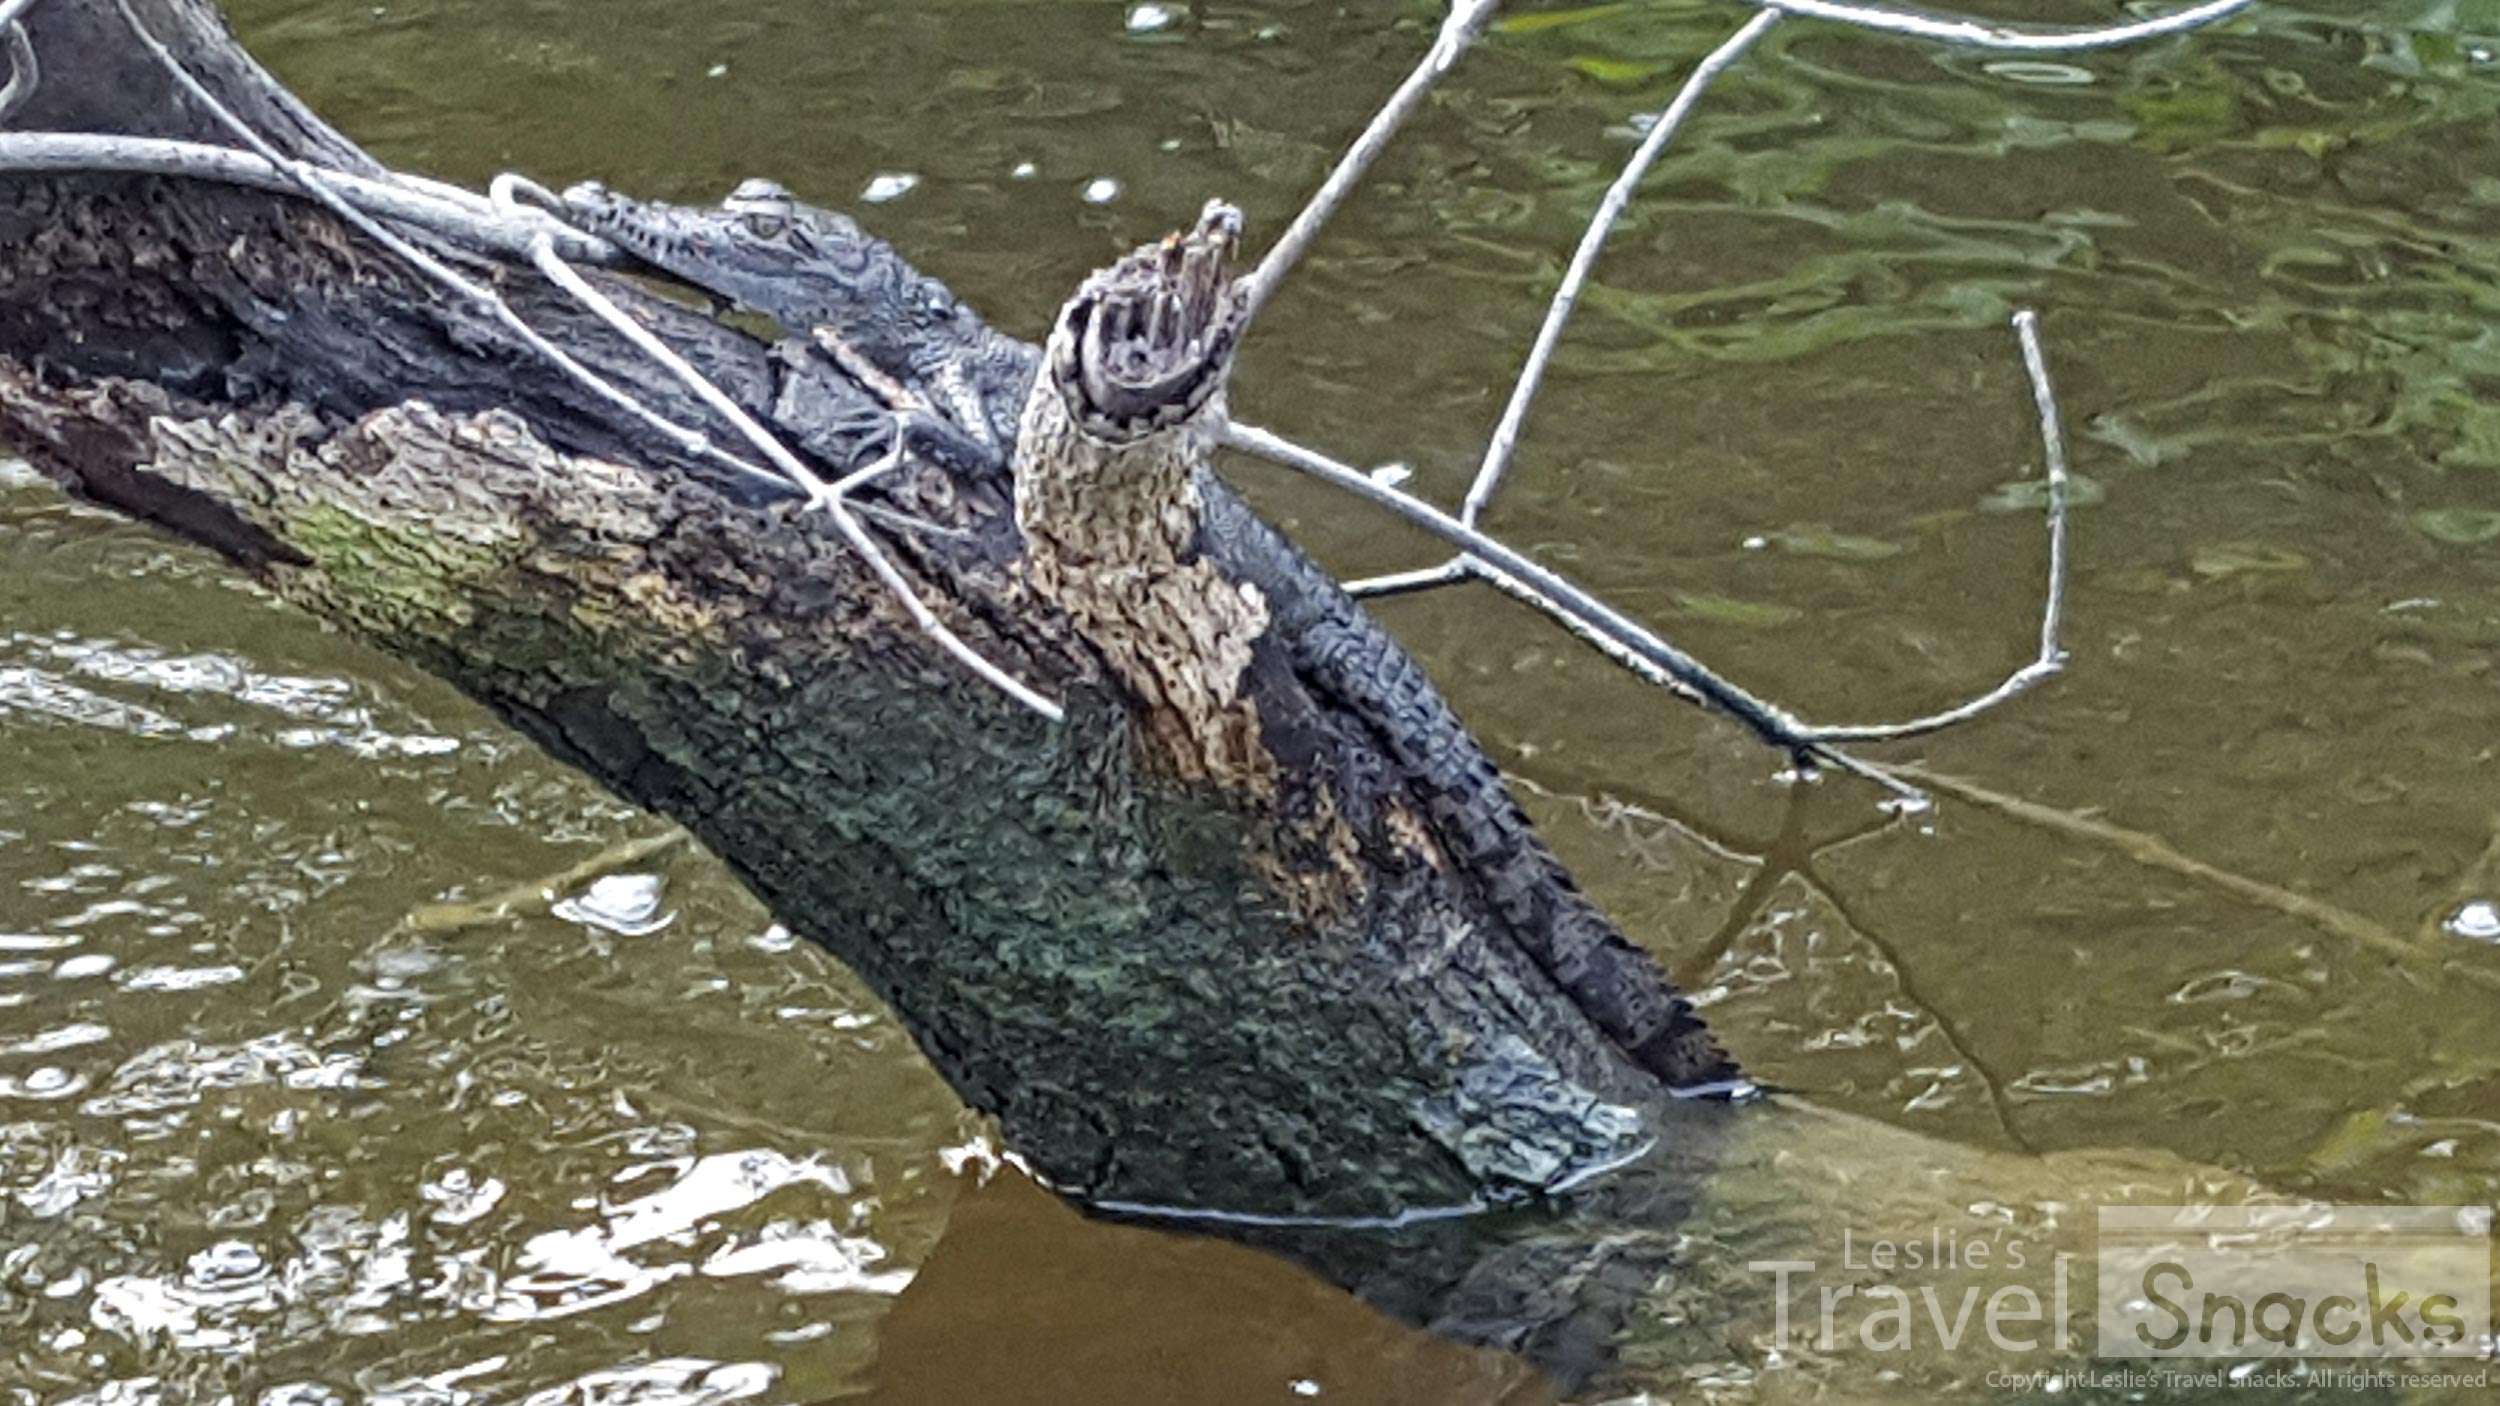 One of a few baby crocodiles we saw. Yep, the biggies are in the river too!